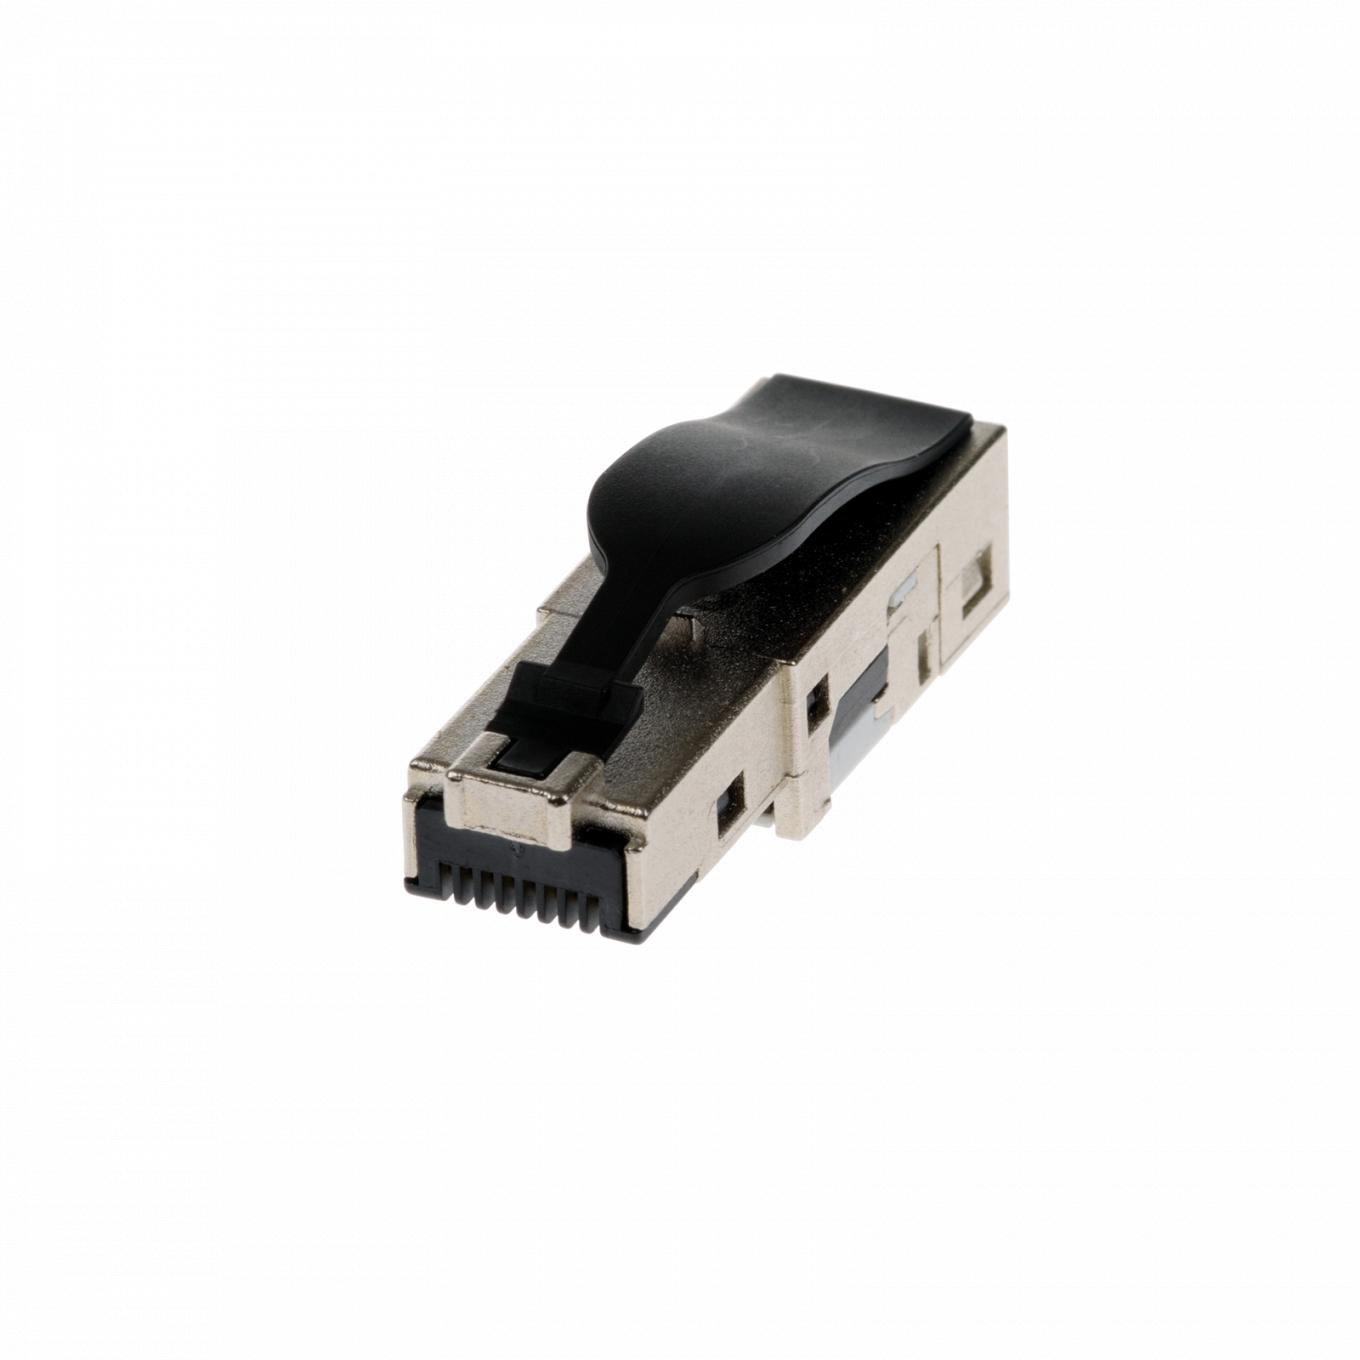 RJ45 Field Connector | Axis Communications